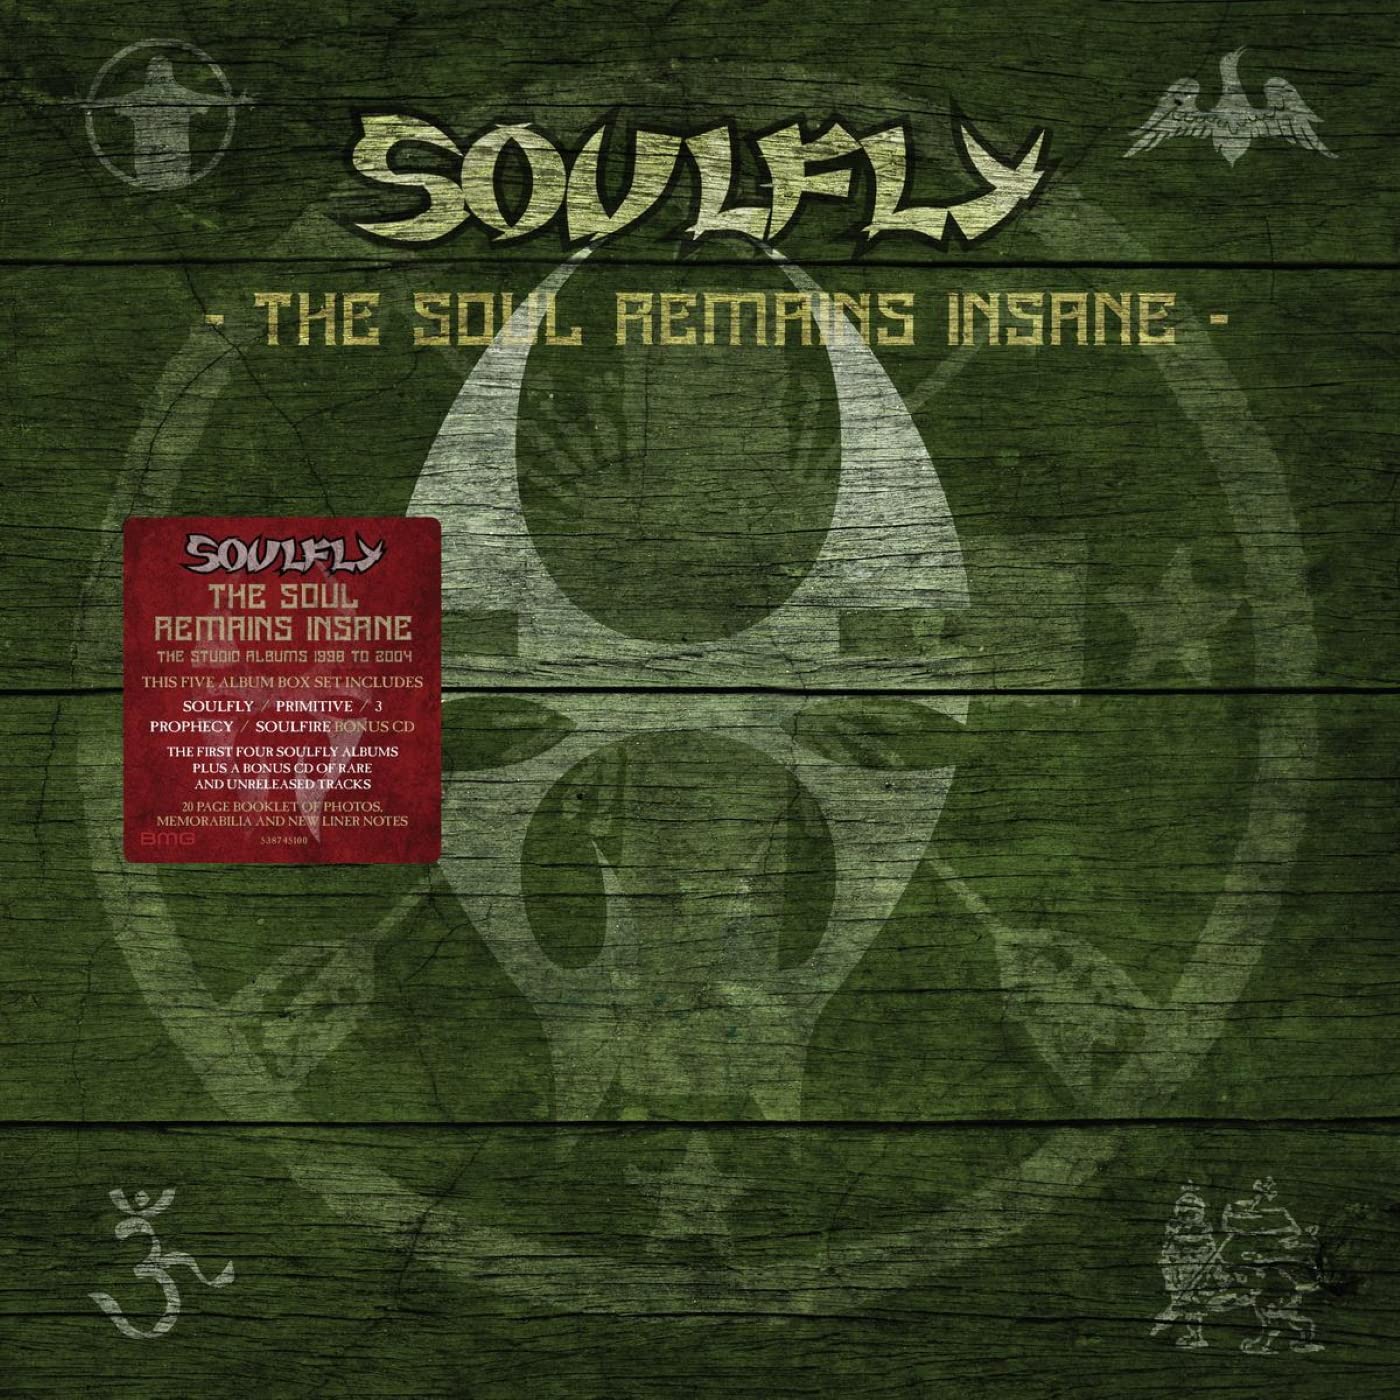 SOULFLY - The Soul Remains Insane: The Studio Albums 1998 to 2004 - 5CD Boxset